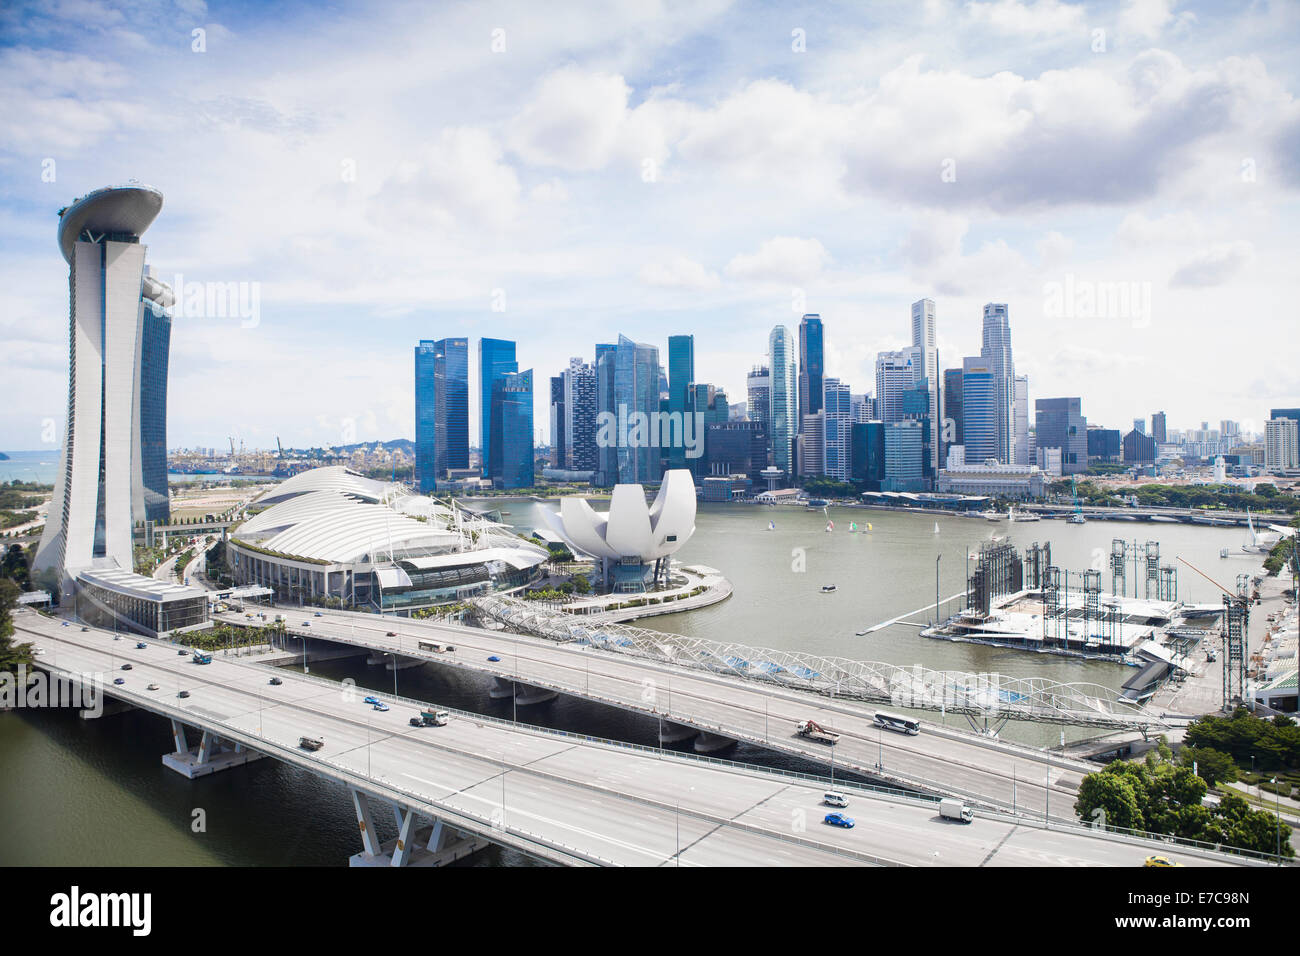 the cityscapes of Singapore Stock Photo